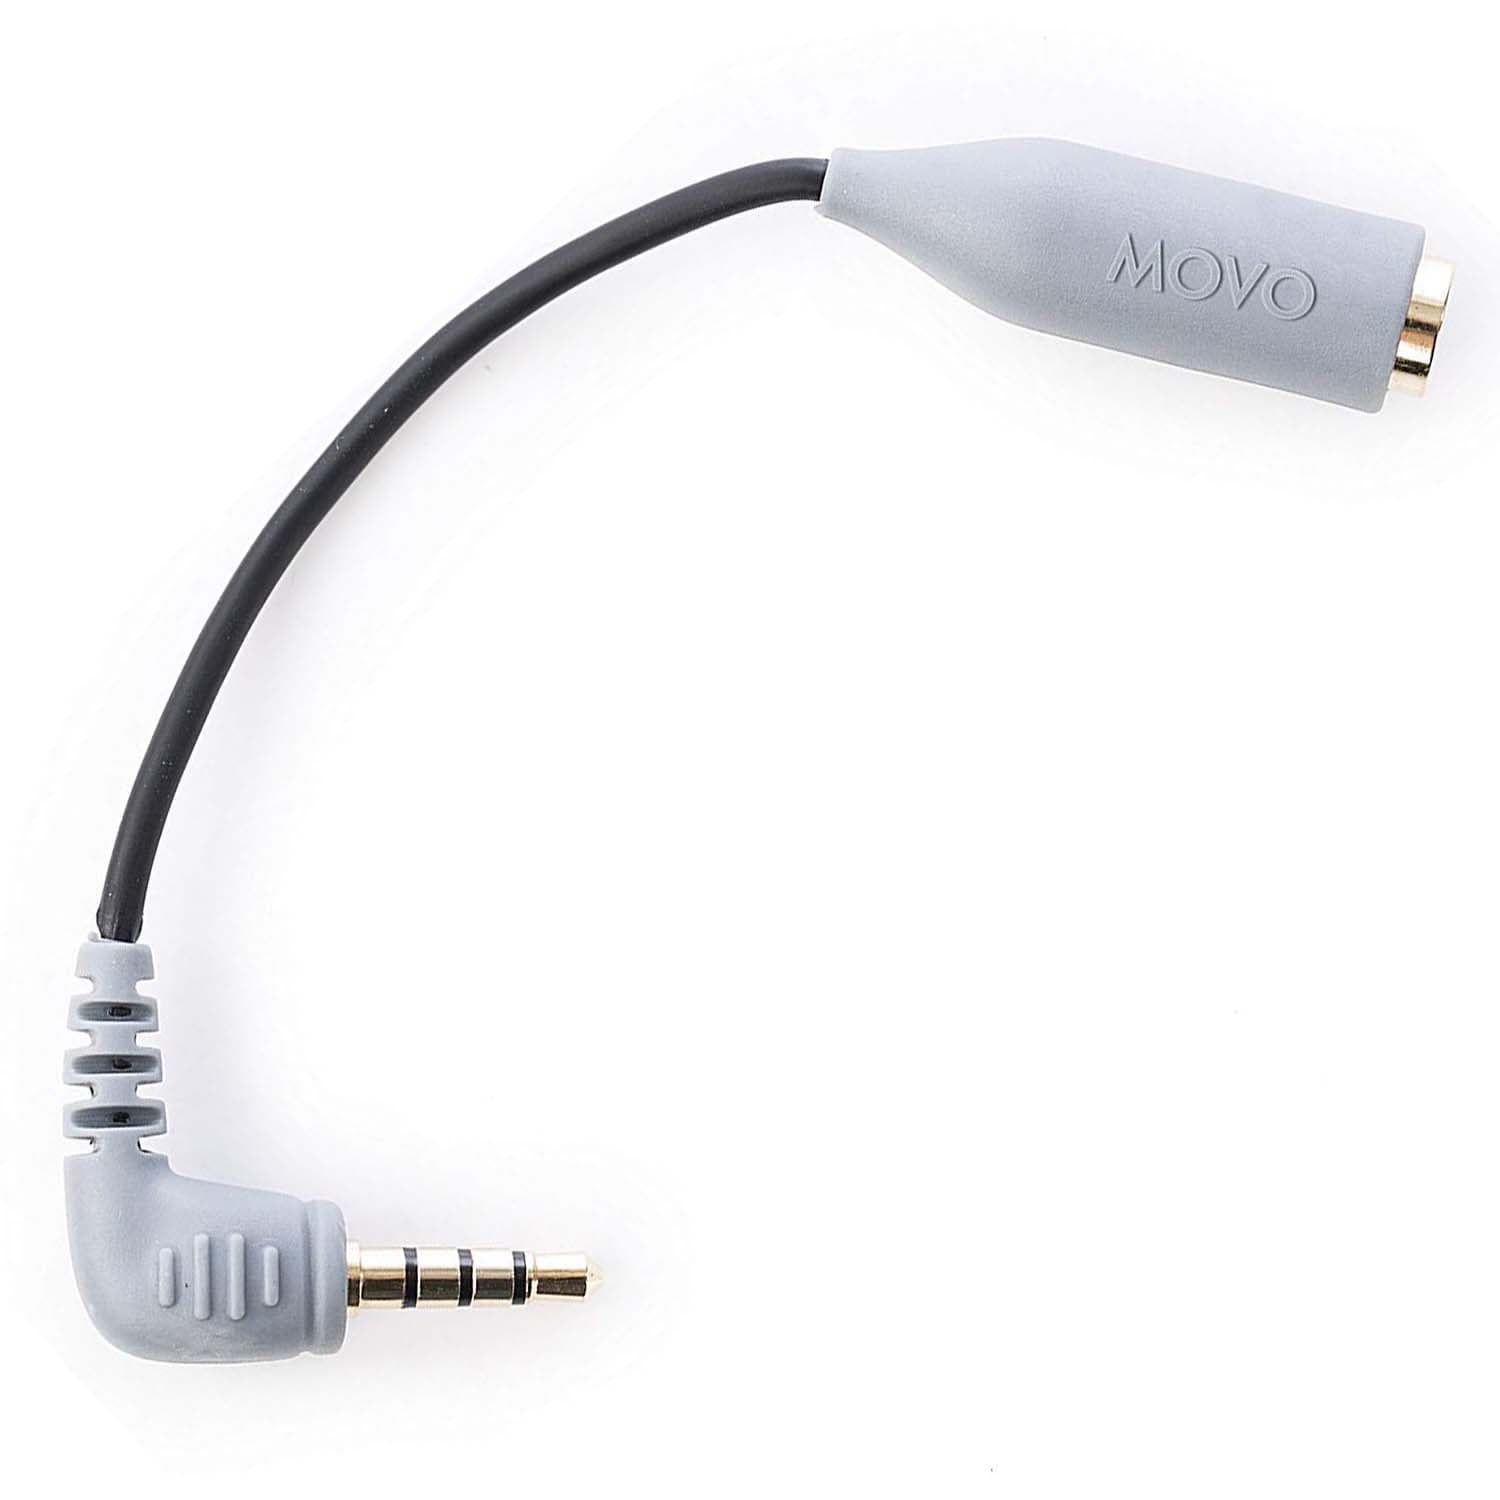 TRS to TRRS Adapter Cable for 3.5mm Mic to Smartphone | MC3 | Movo